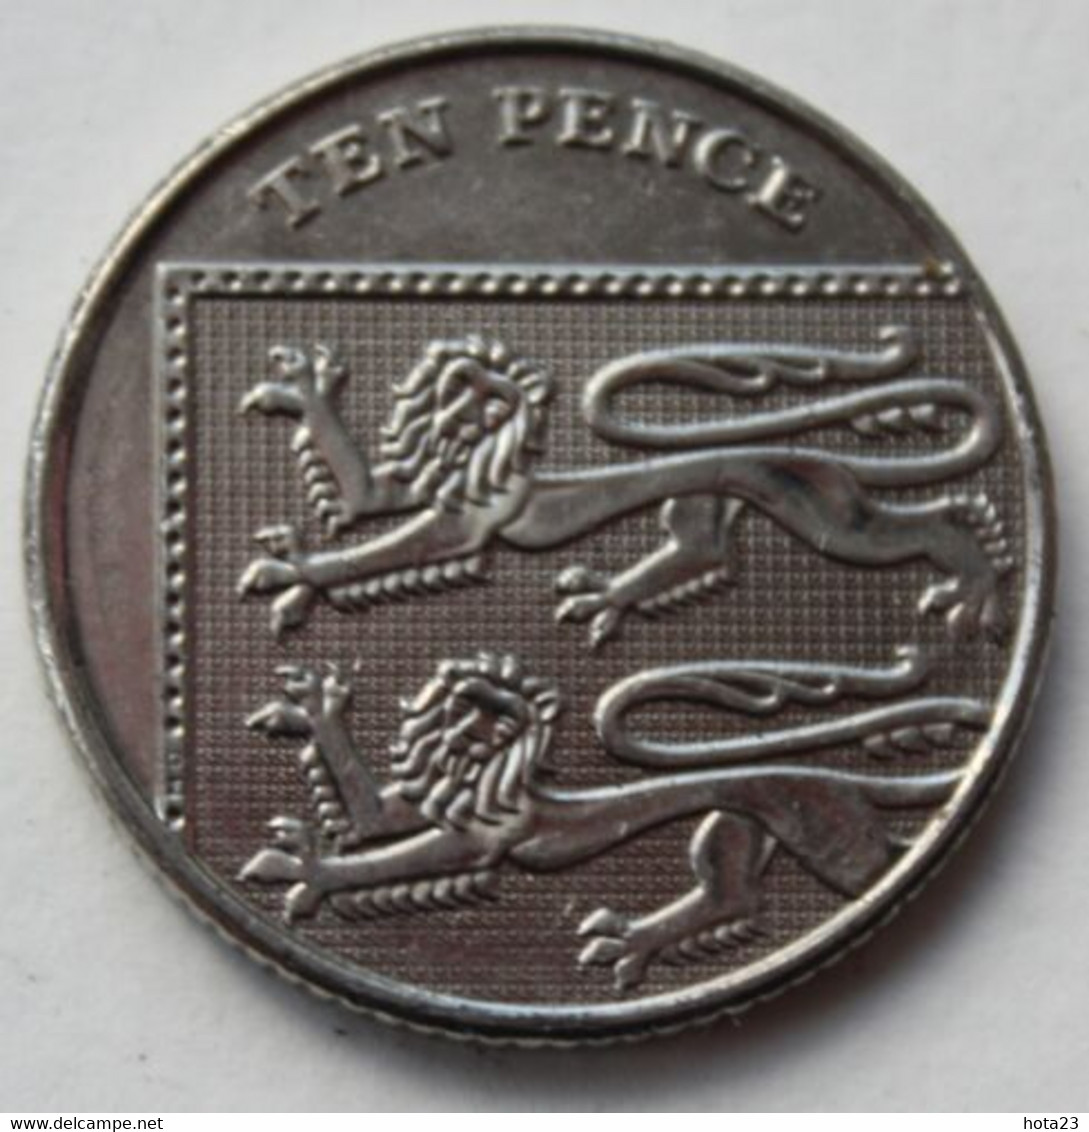 10 P Ten Pence Coin Crowned Lion Shield Of Royal Arms 2013 - 10 Pence & 10 New Pence